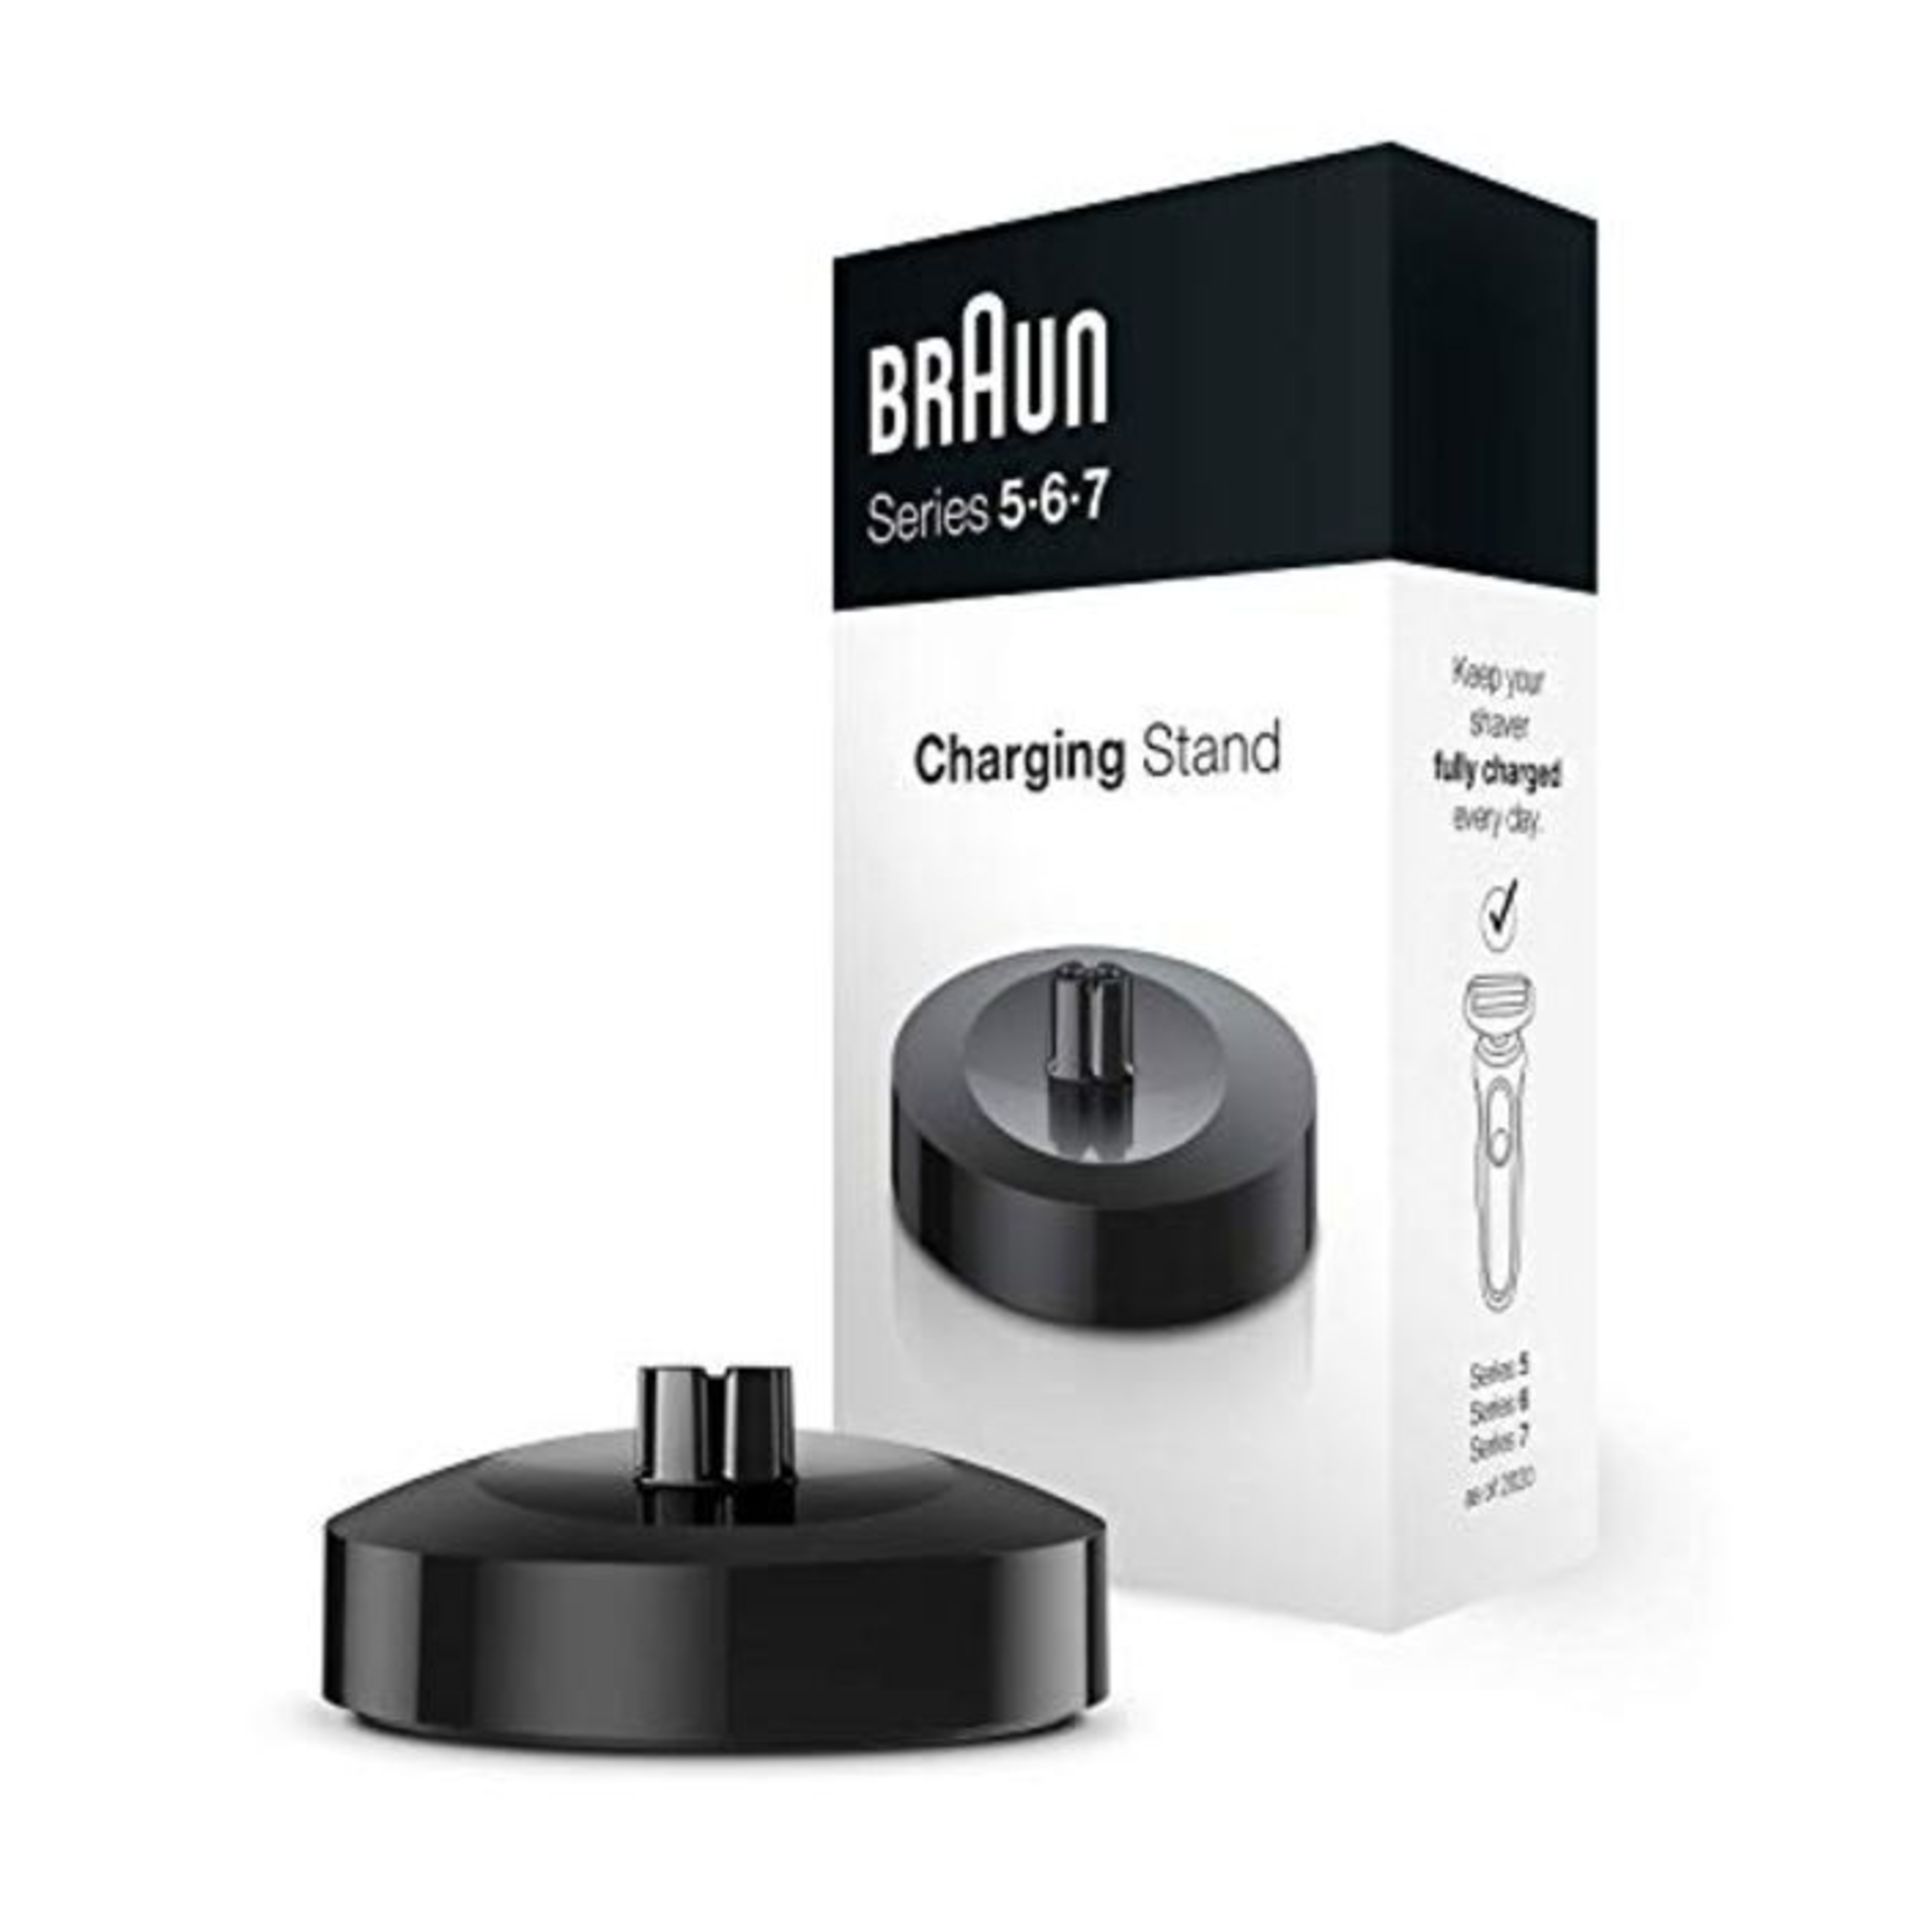 Braun Shaver Charging Stand For Series 5, 6 and 7 Electric Shavers, Recharge and Store